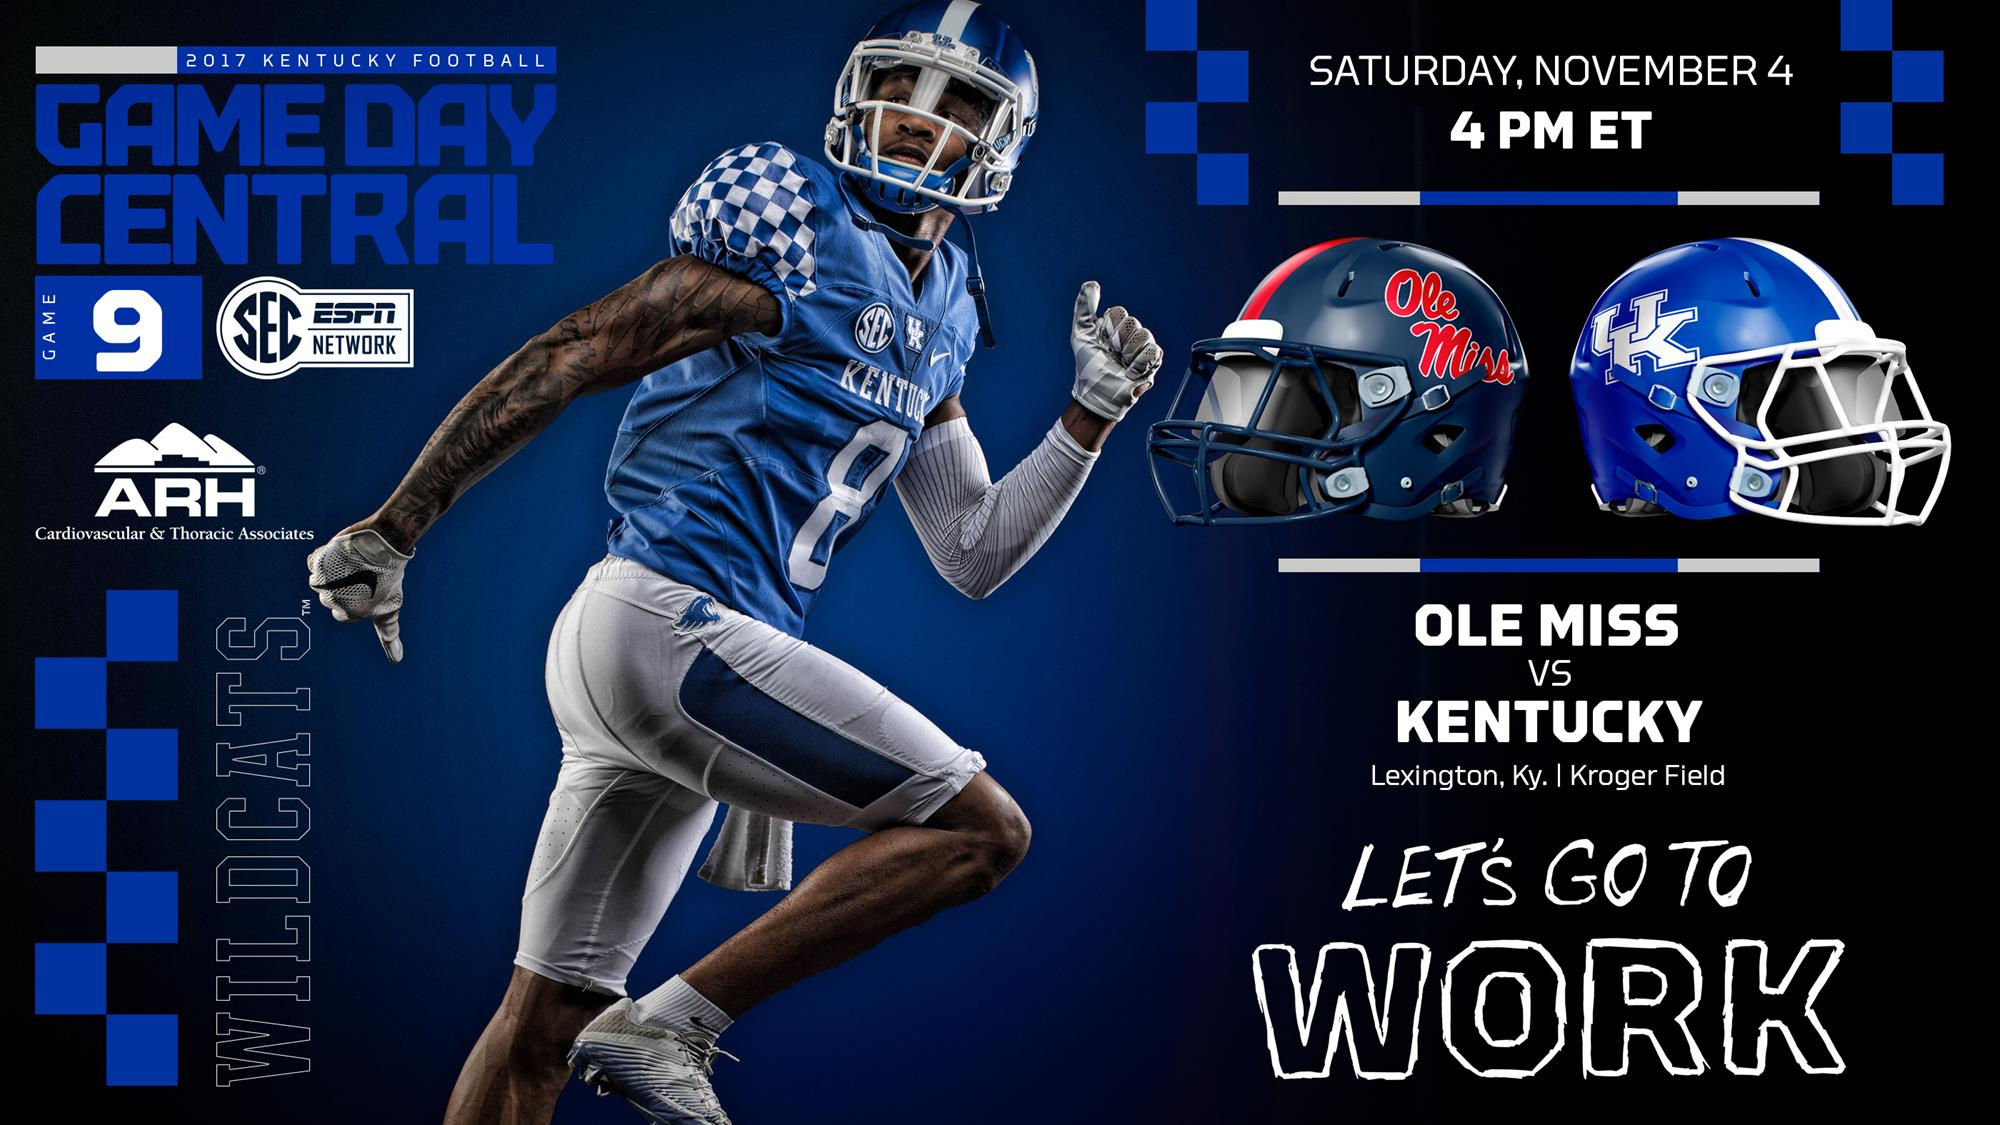 Bowl-Eligible Kentucky Hosts Ole Miss to Open November